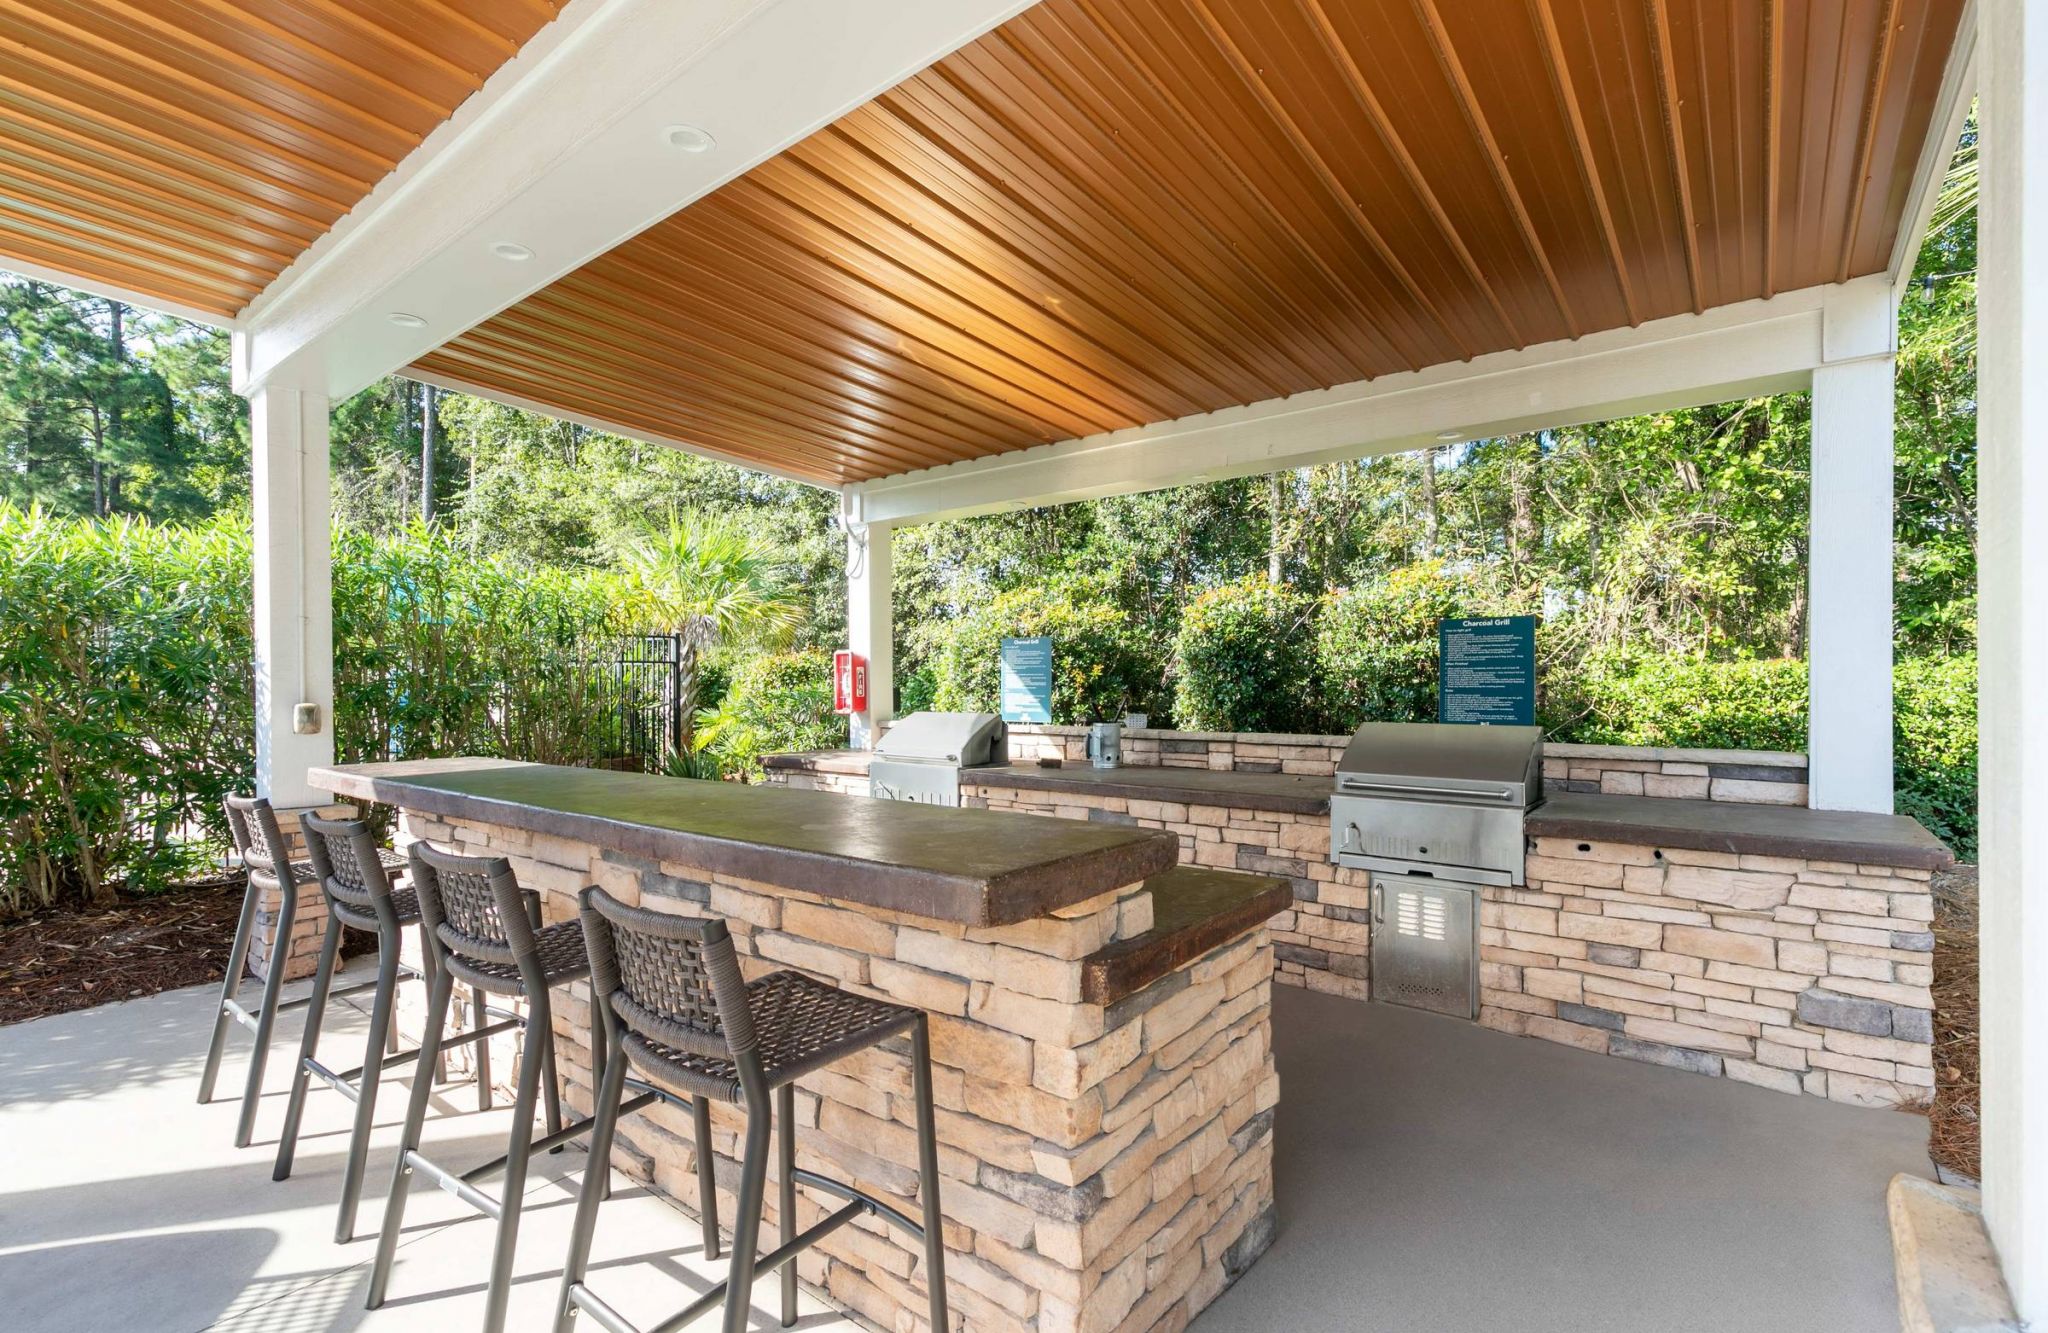 Hawthorne at Murrayville covered outdoor entertainment area with barbecues and bar style seating